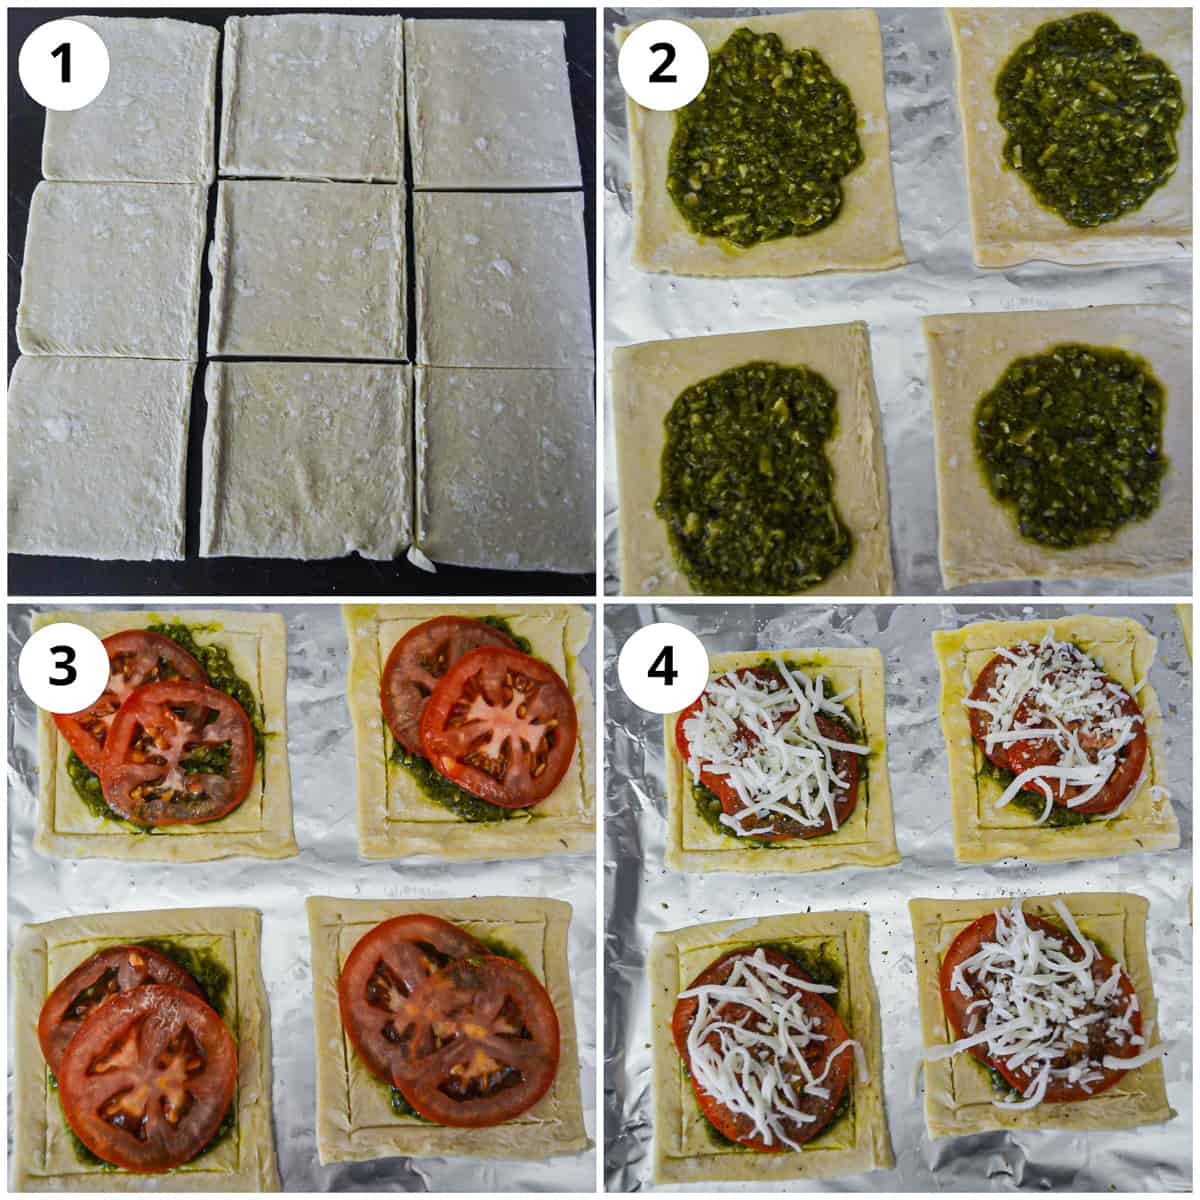 step by step photos to show how to make the puff pastry tarts